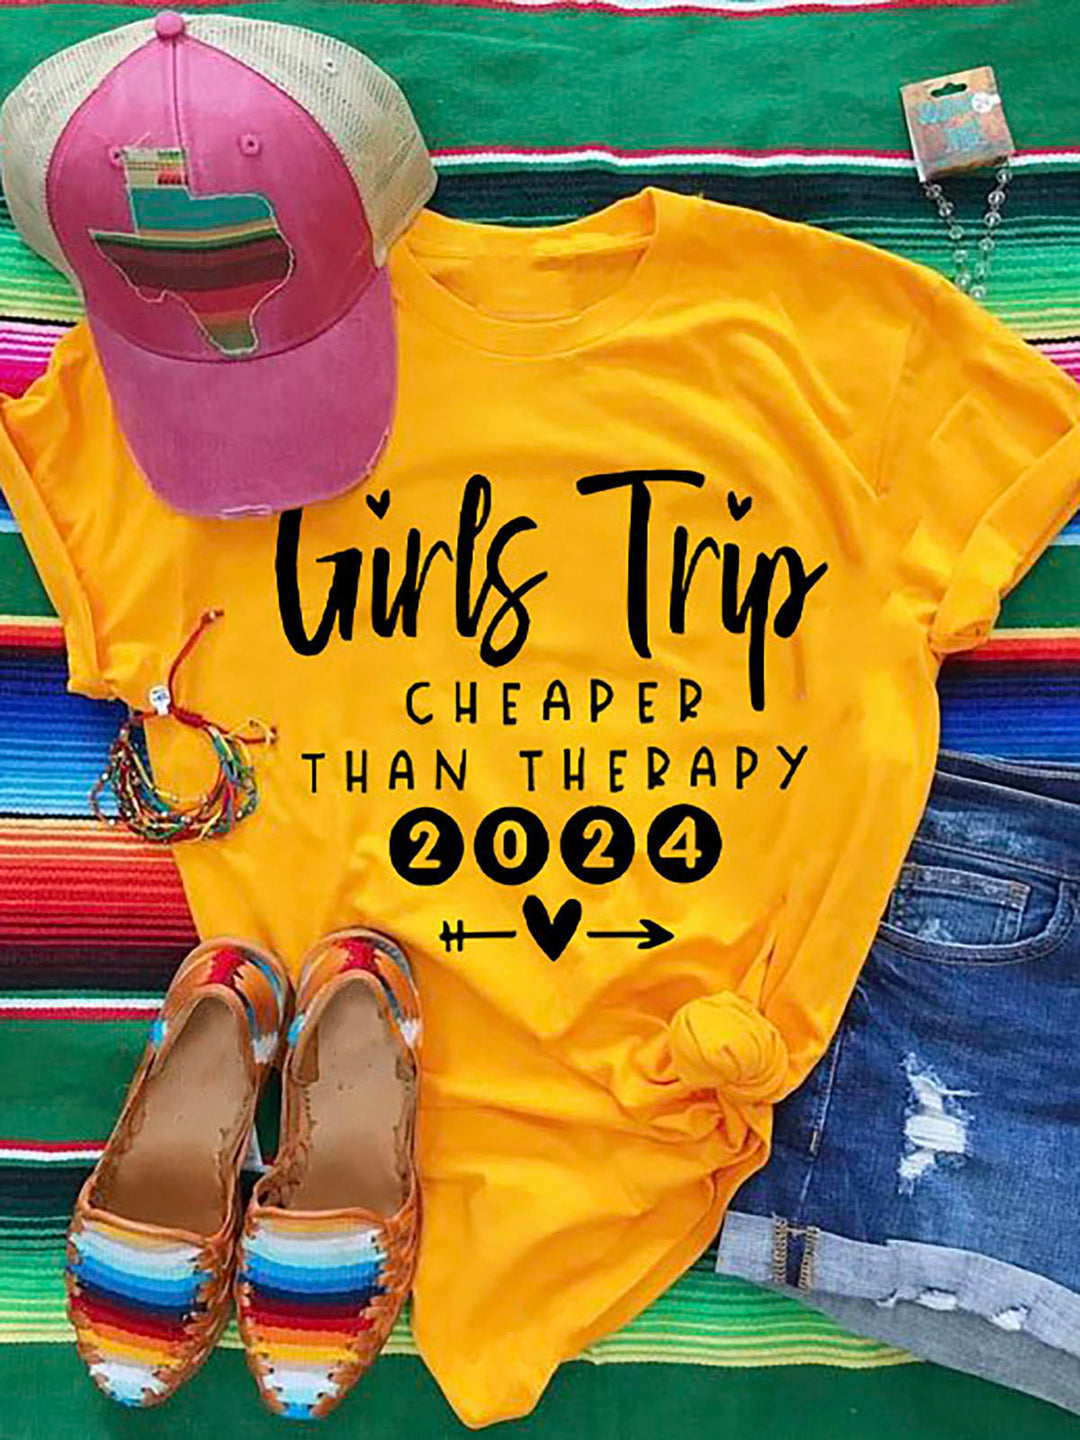 Girls Trip Cheaper Than Therapy 2024 Tee